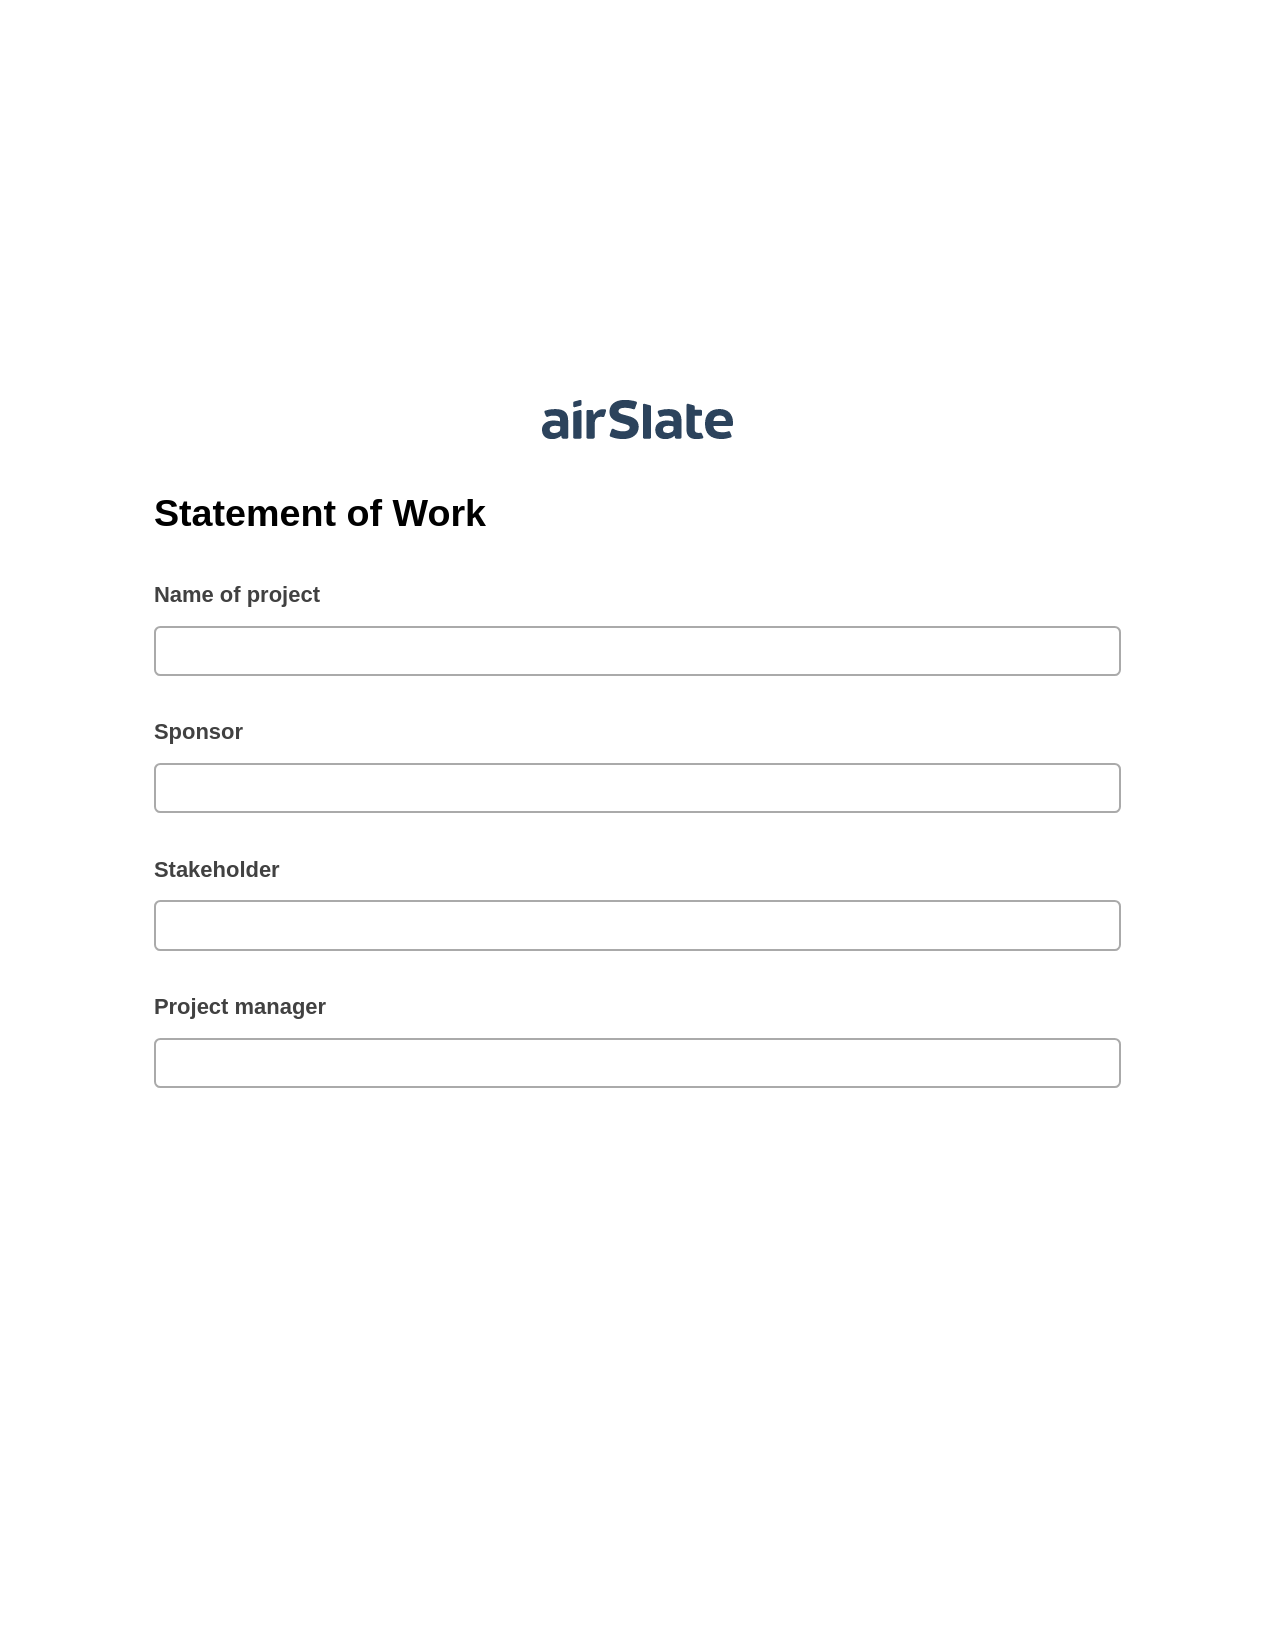 Statement of Work Pre-fill from Google Sheet Dropdown Options Bot, Remove Tags From Slate Bot, Export to Smartsheet